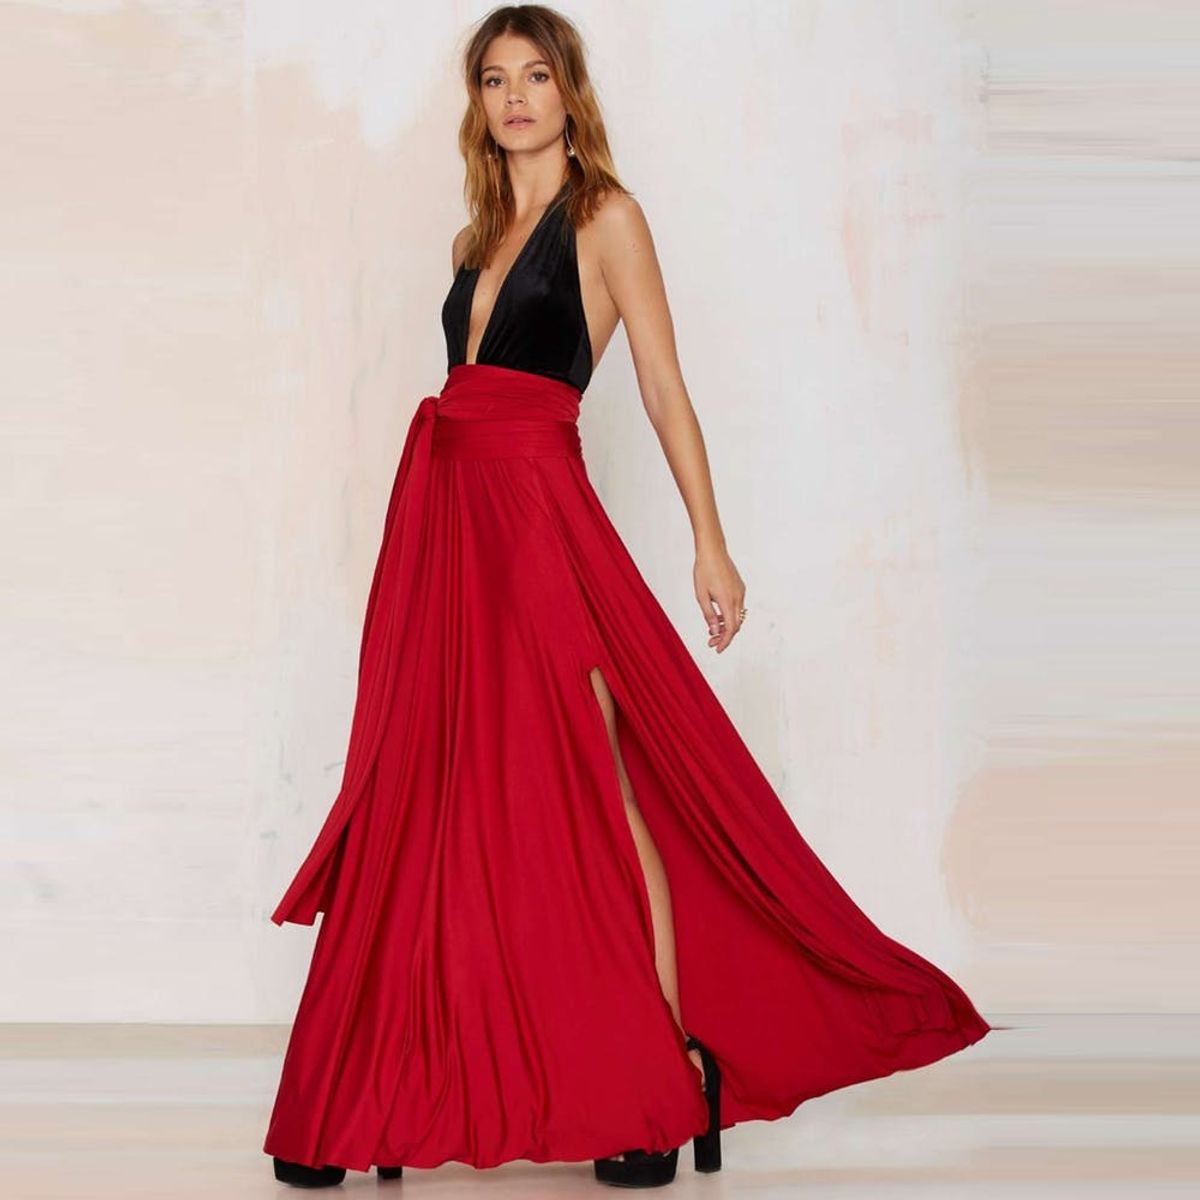 14 Alternatives to the Traditional Prom Dress